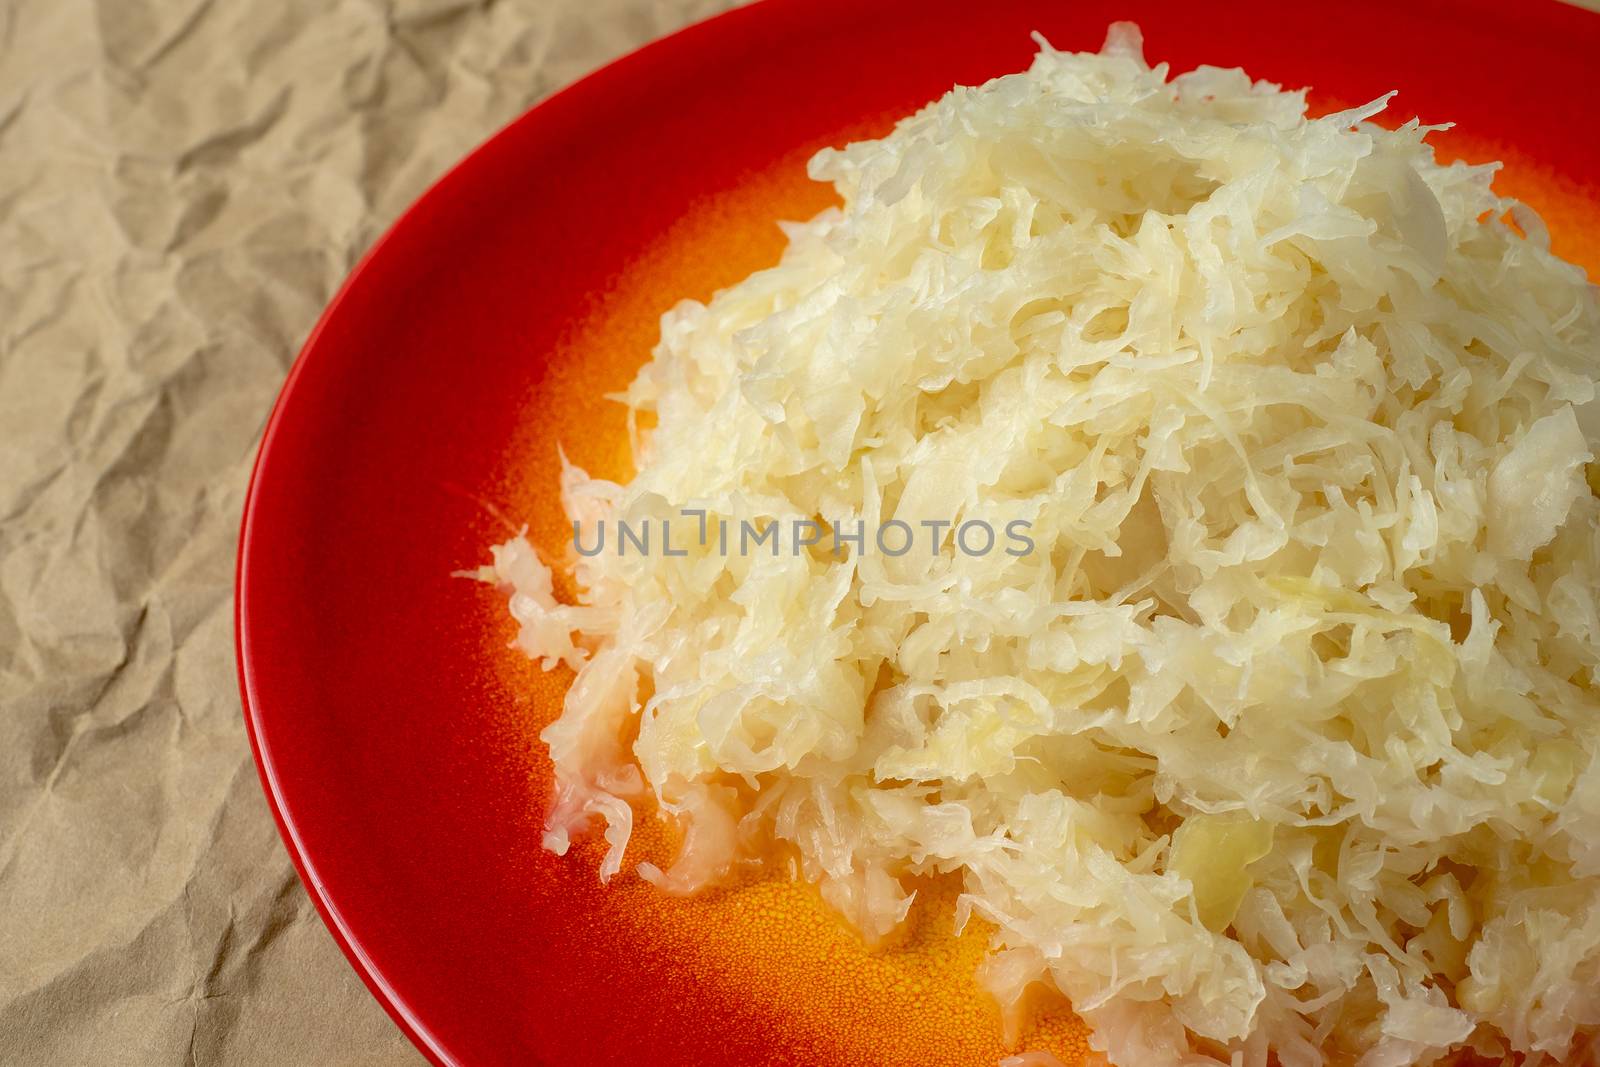 Fermented cabbage. Red plate of sauerkraut (pickled white cabbage).